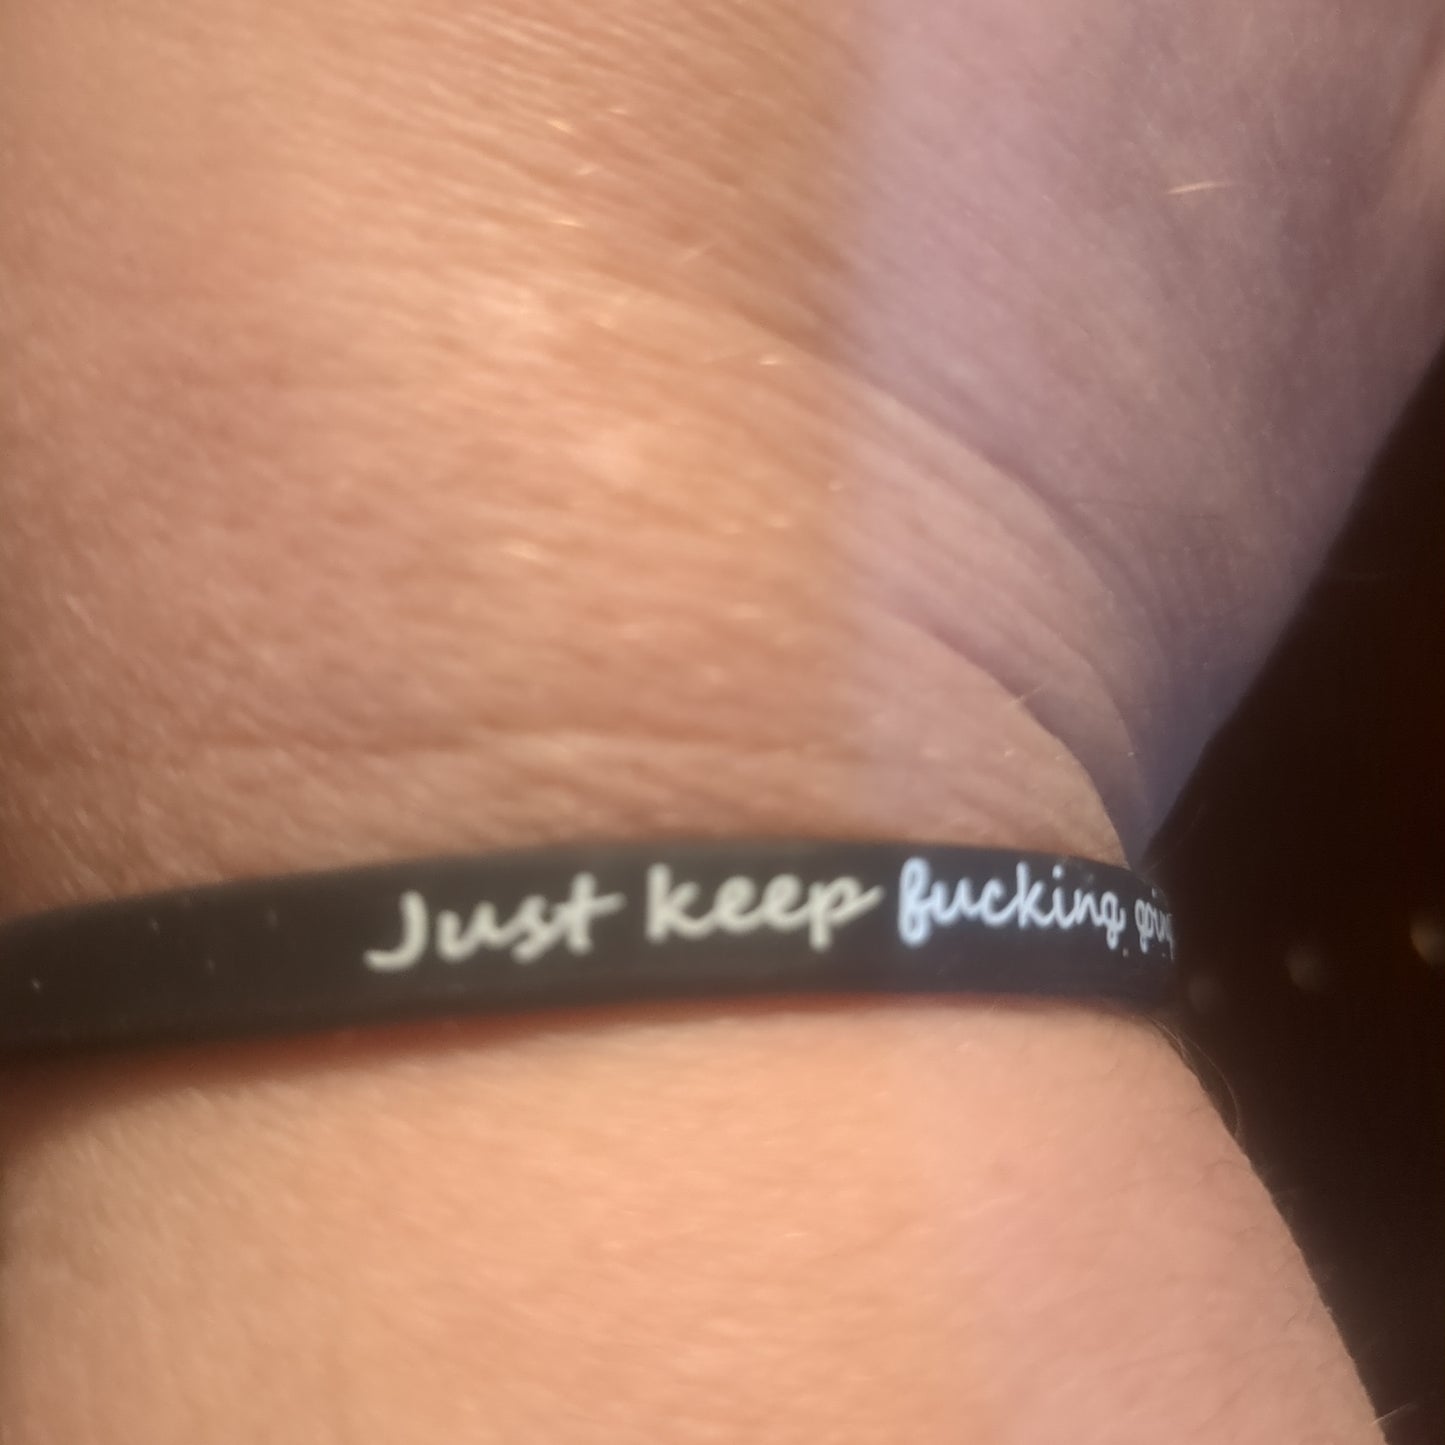 Caution x-rated black silicone bracelet for encouragement says just keep going